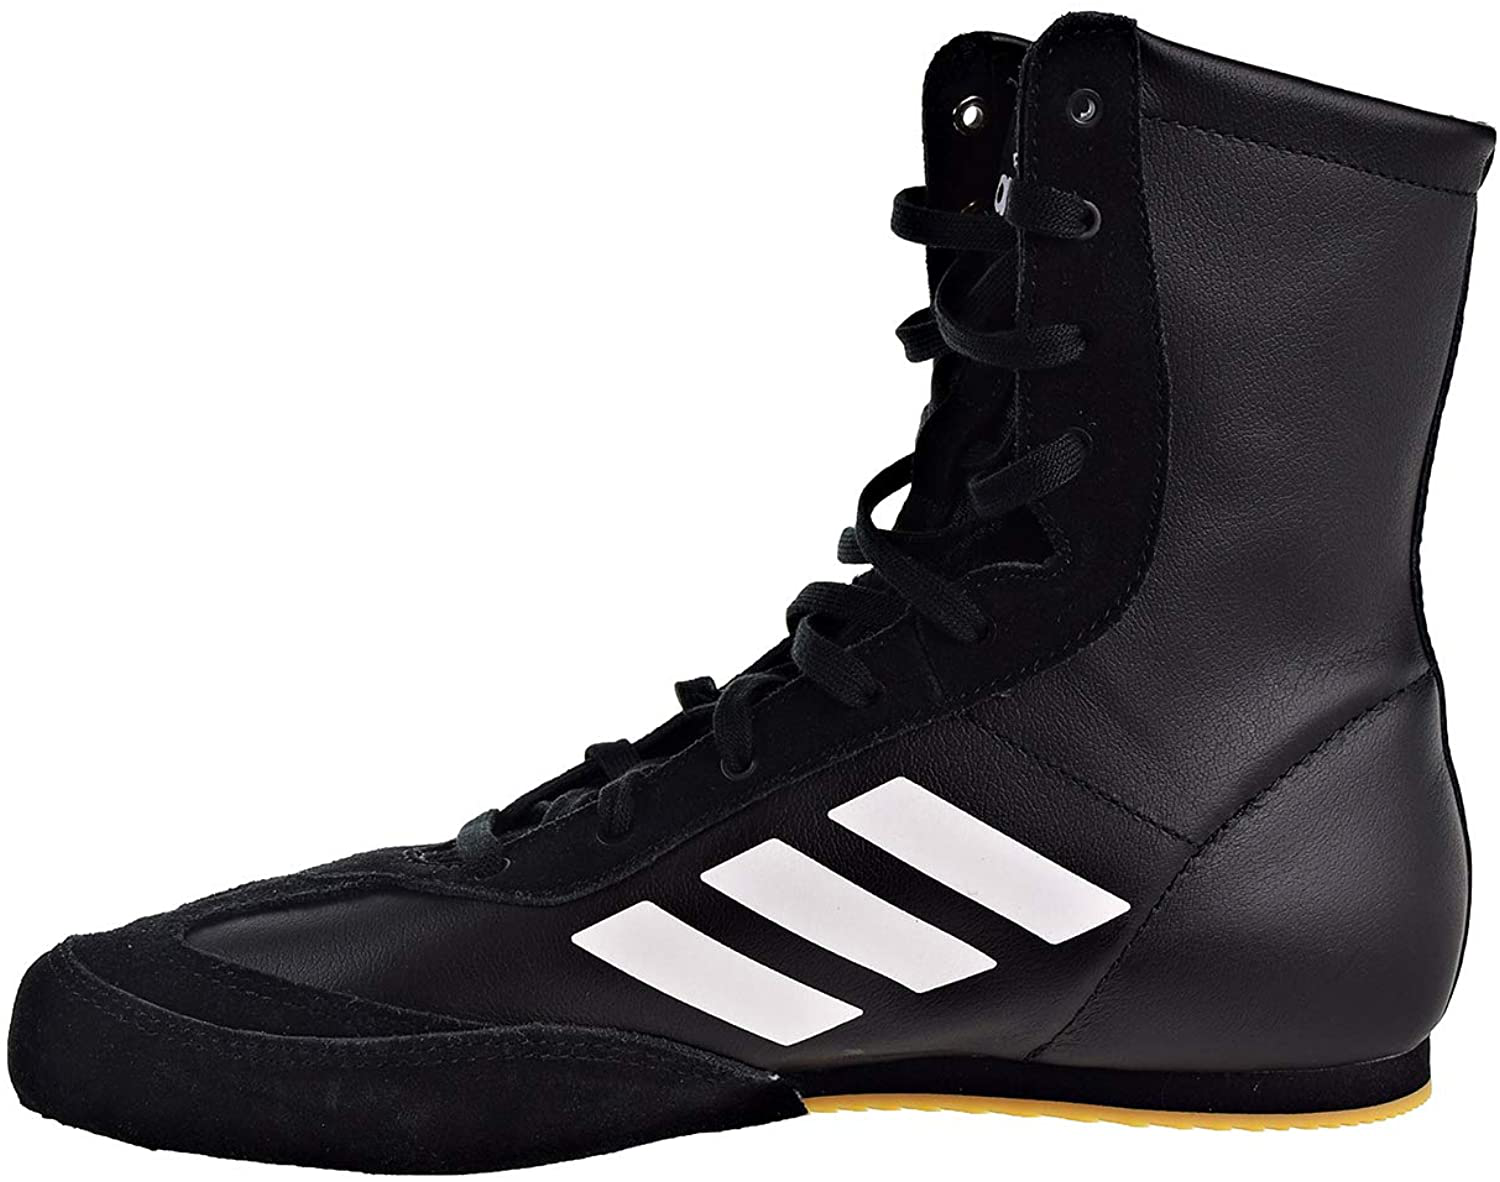 adidas Mens Box Hog x Special Other Sport Casual Shoes,